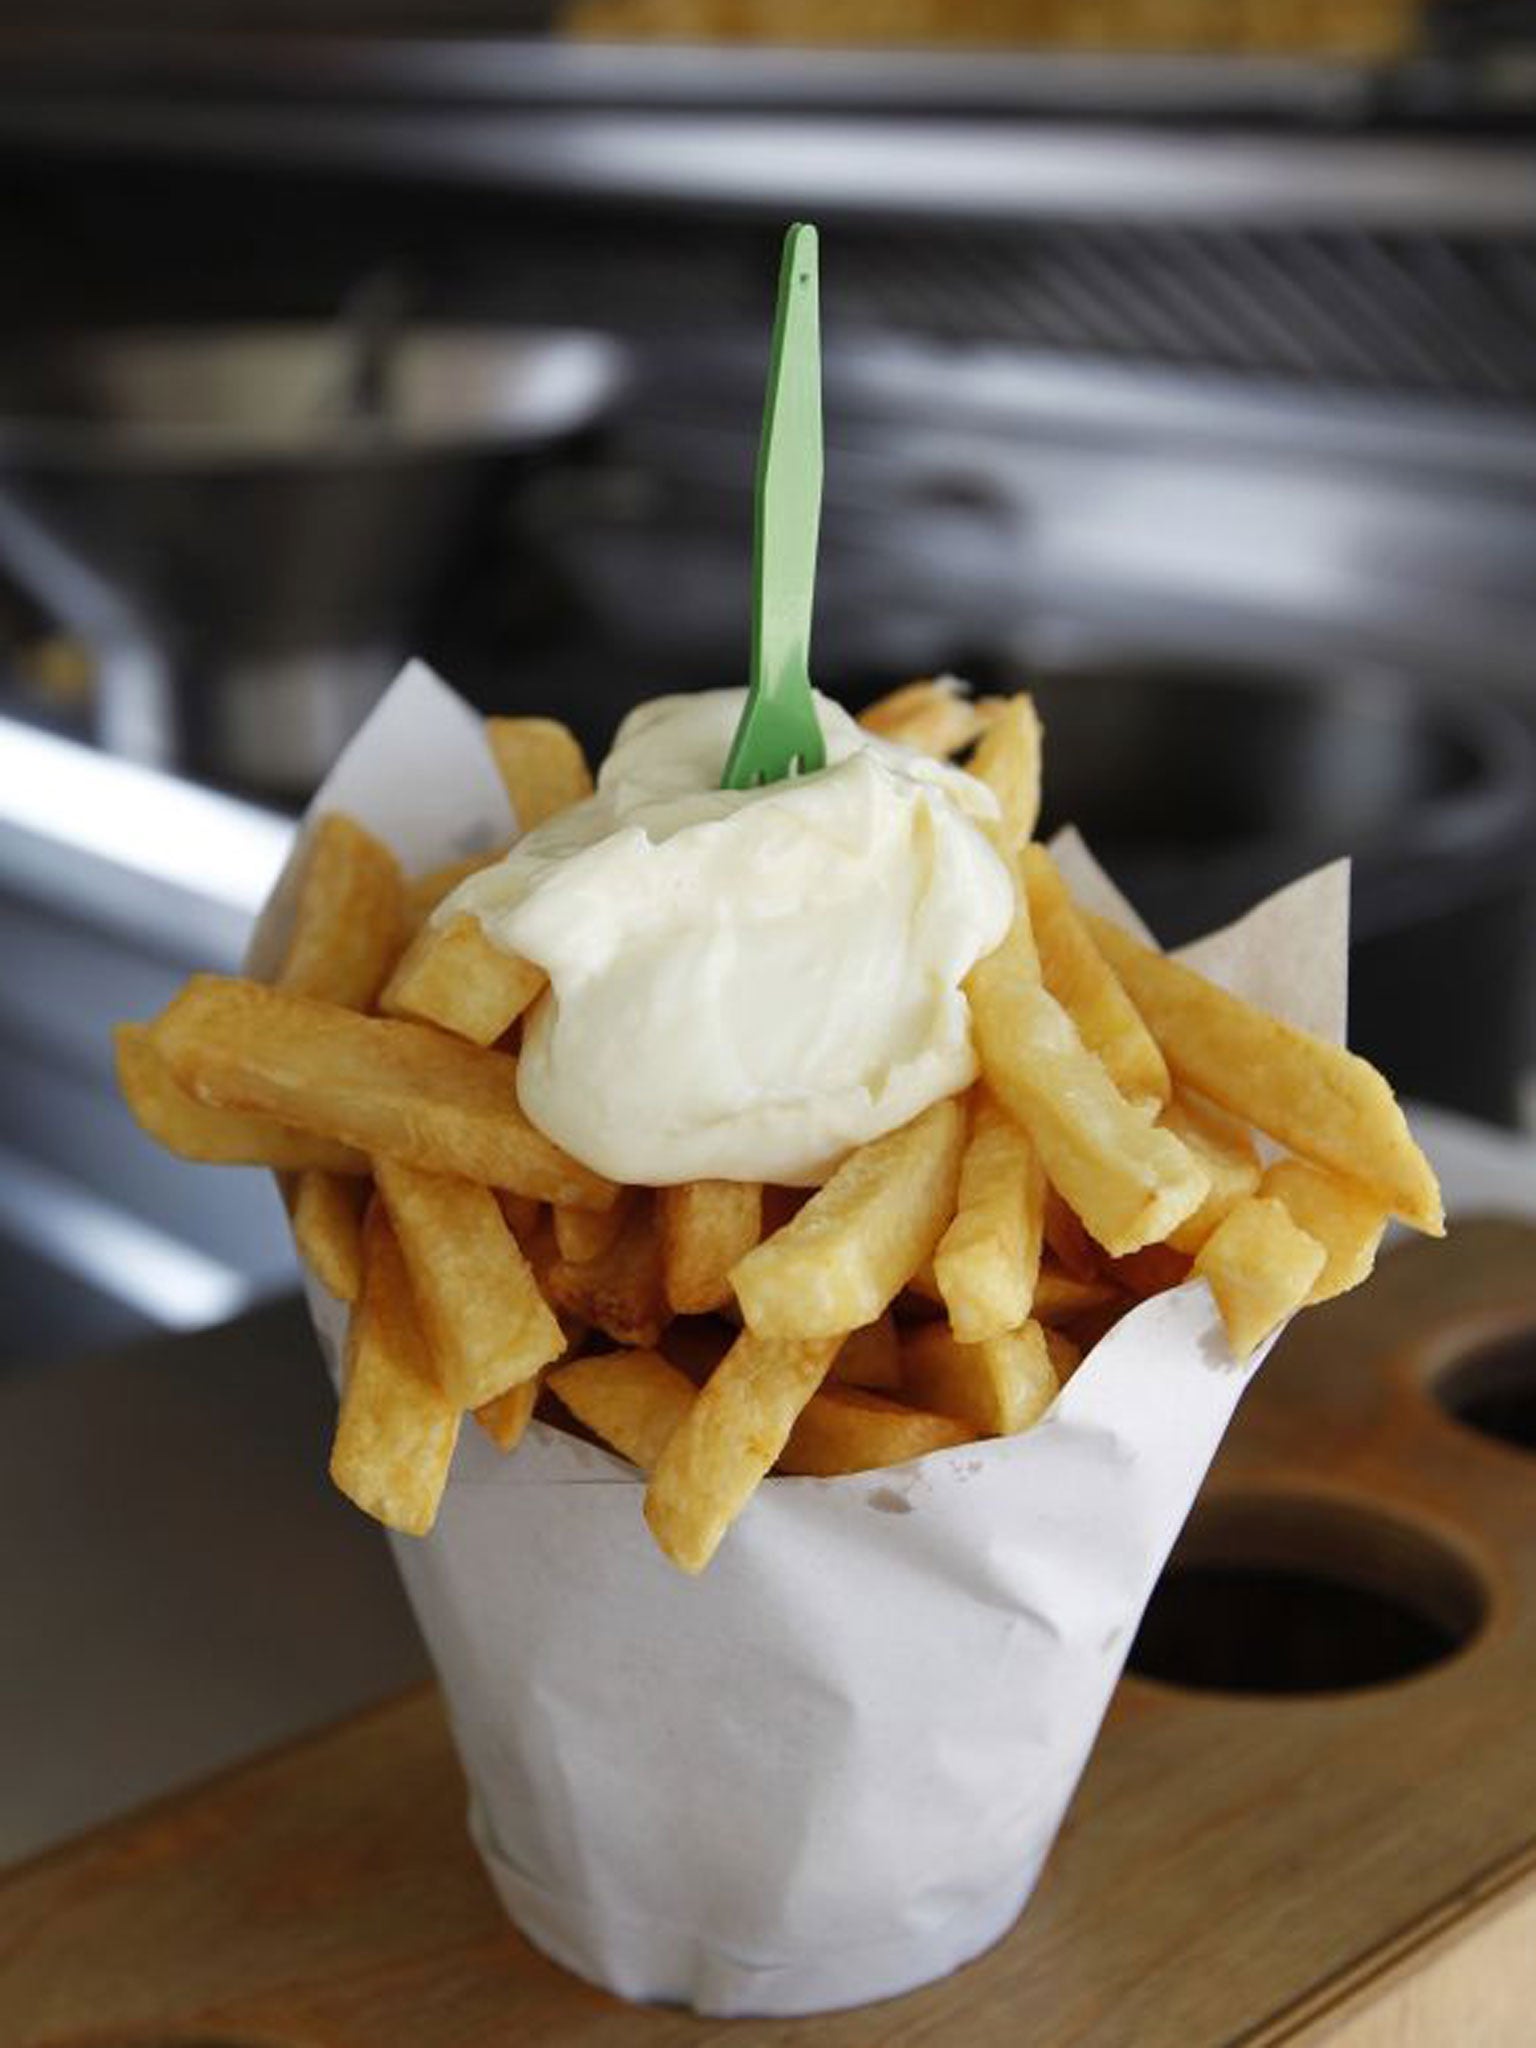 It is the Belgians who have truly embraced the humble frite